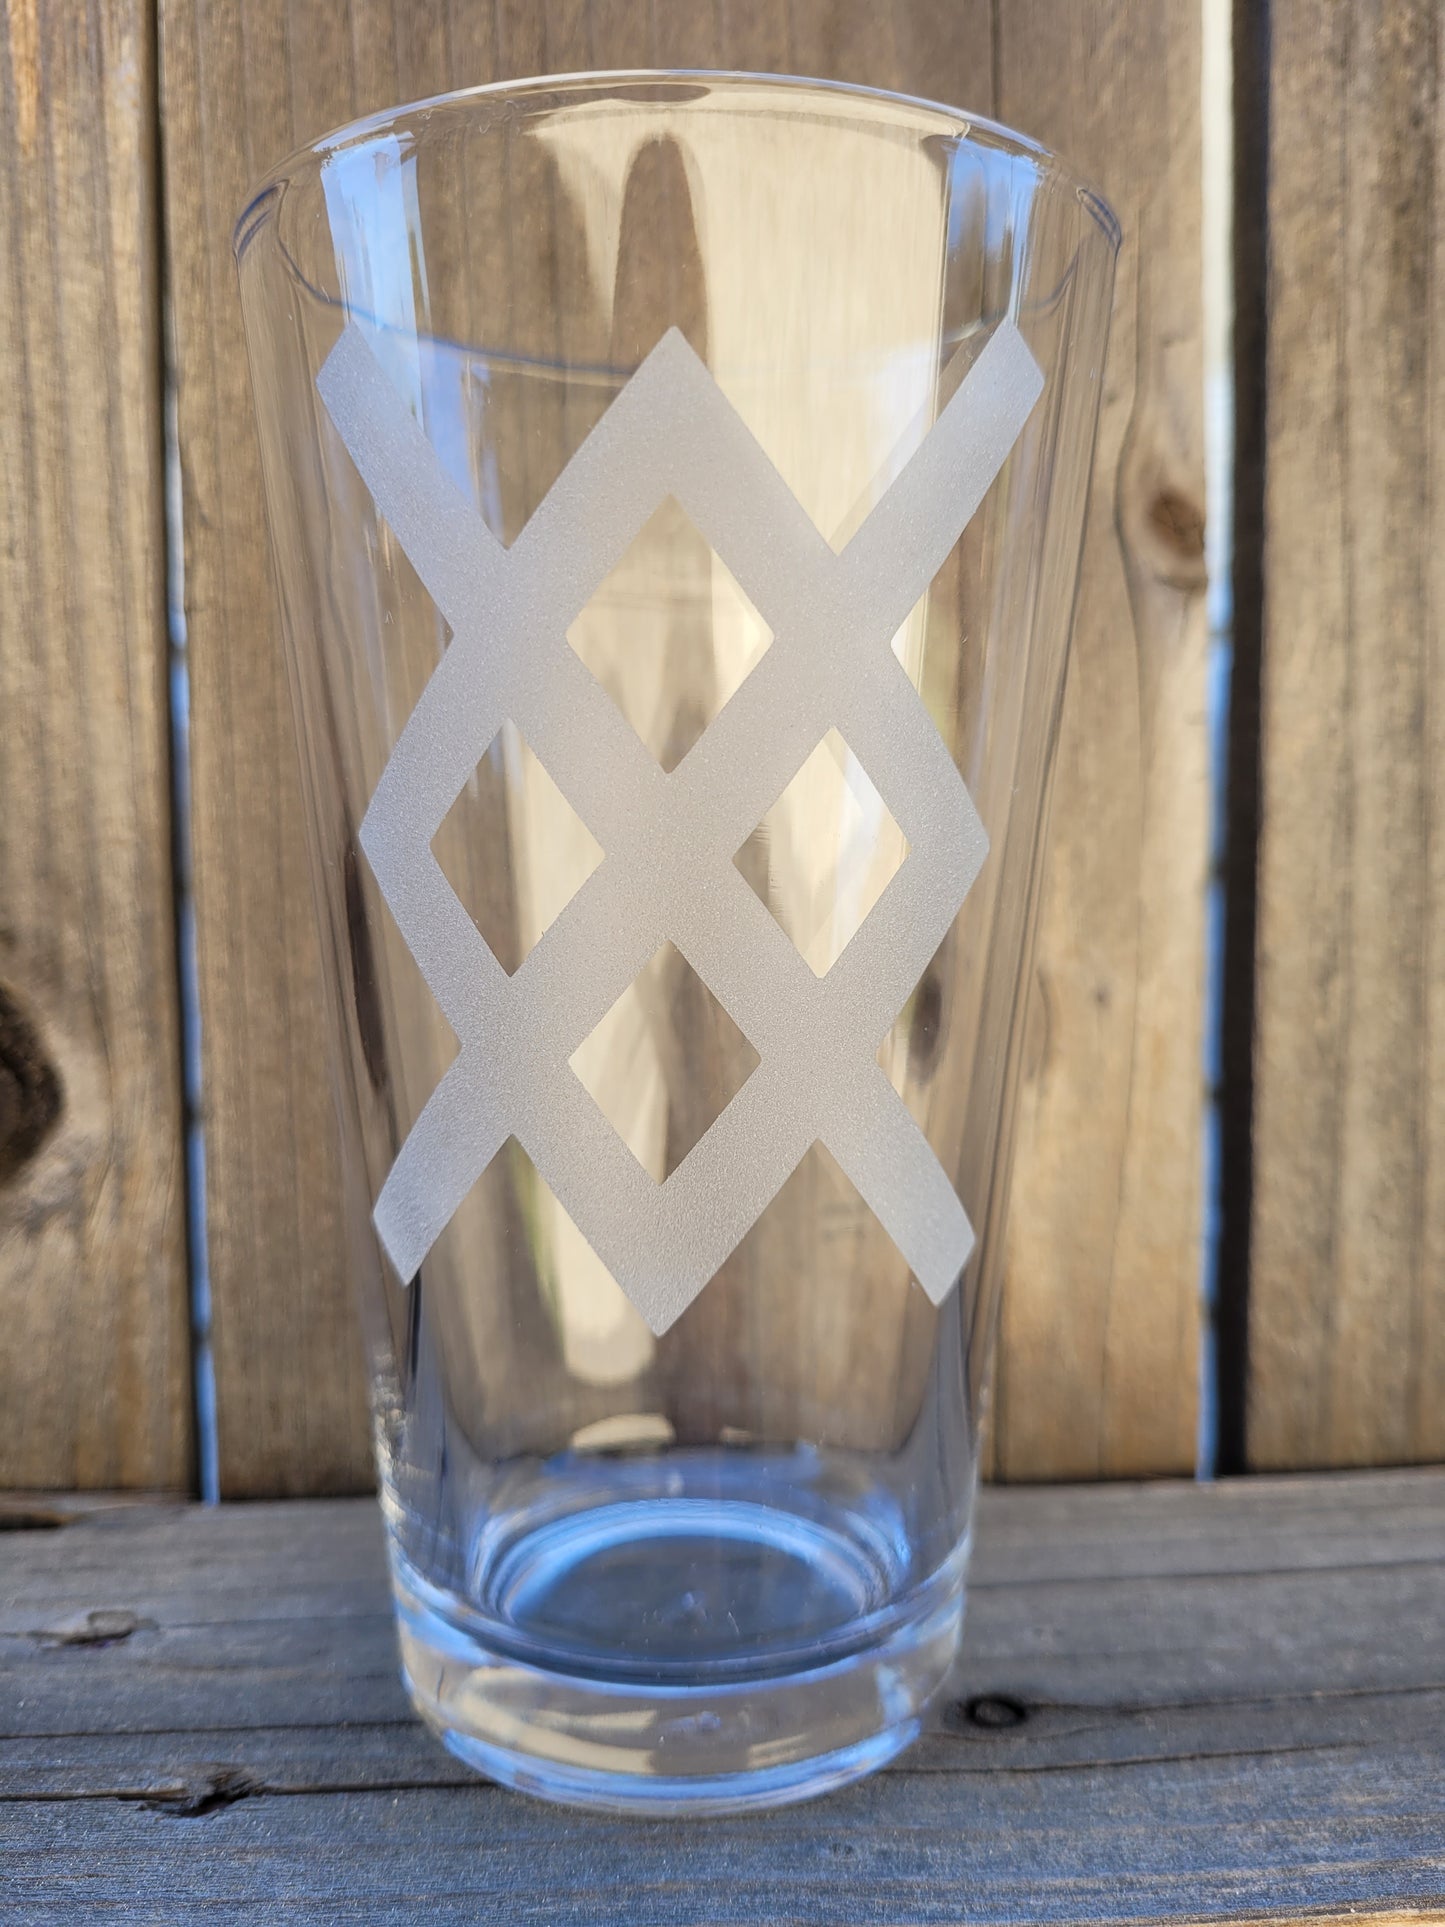 Nardcore Pint Glass - Made to Order